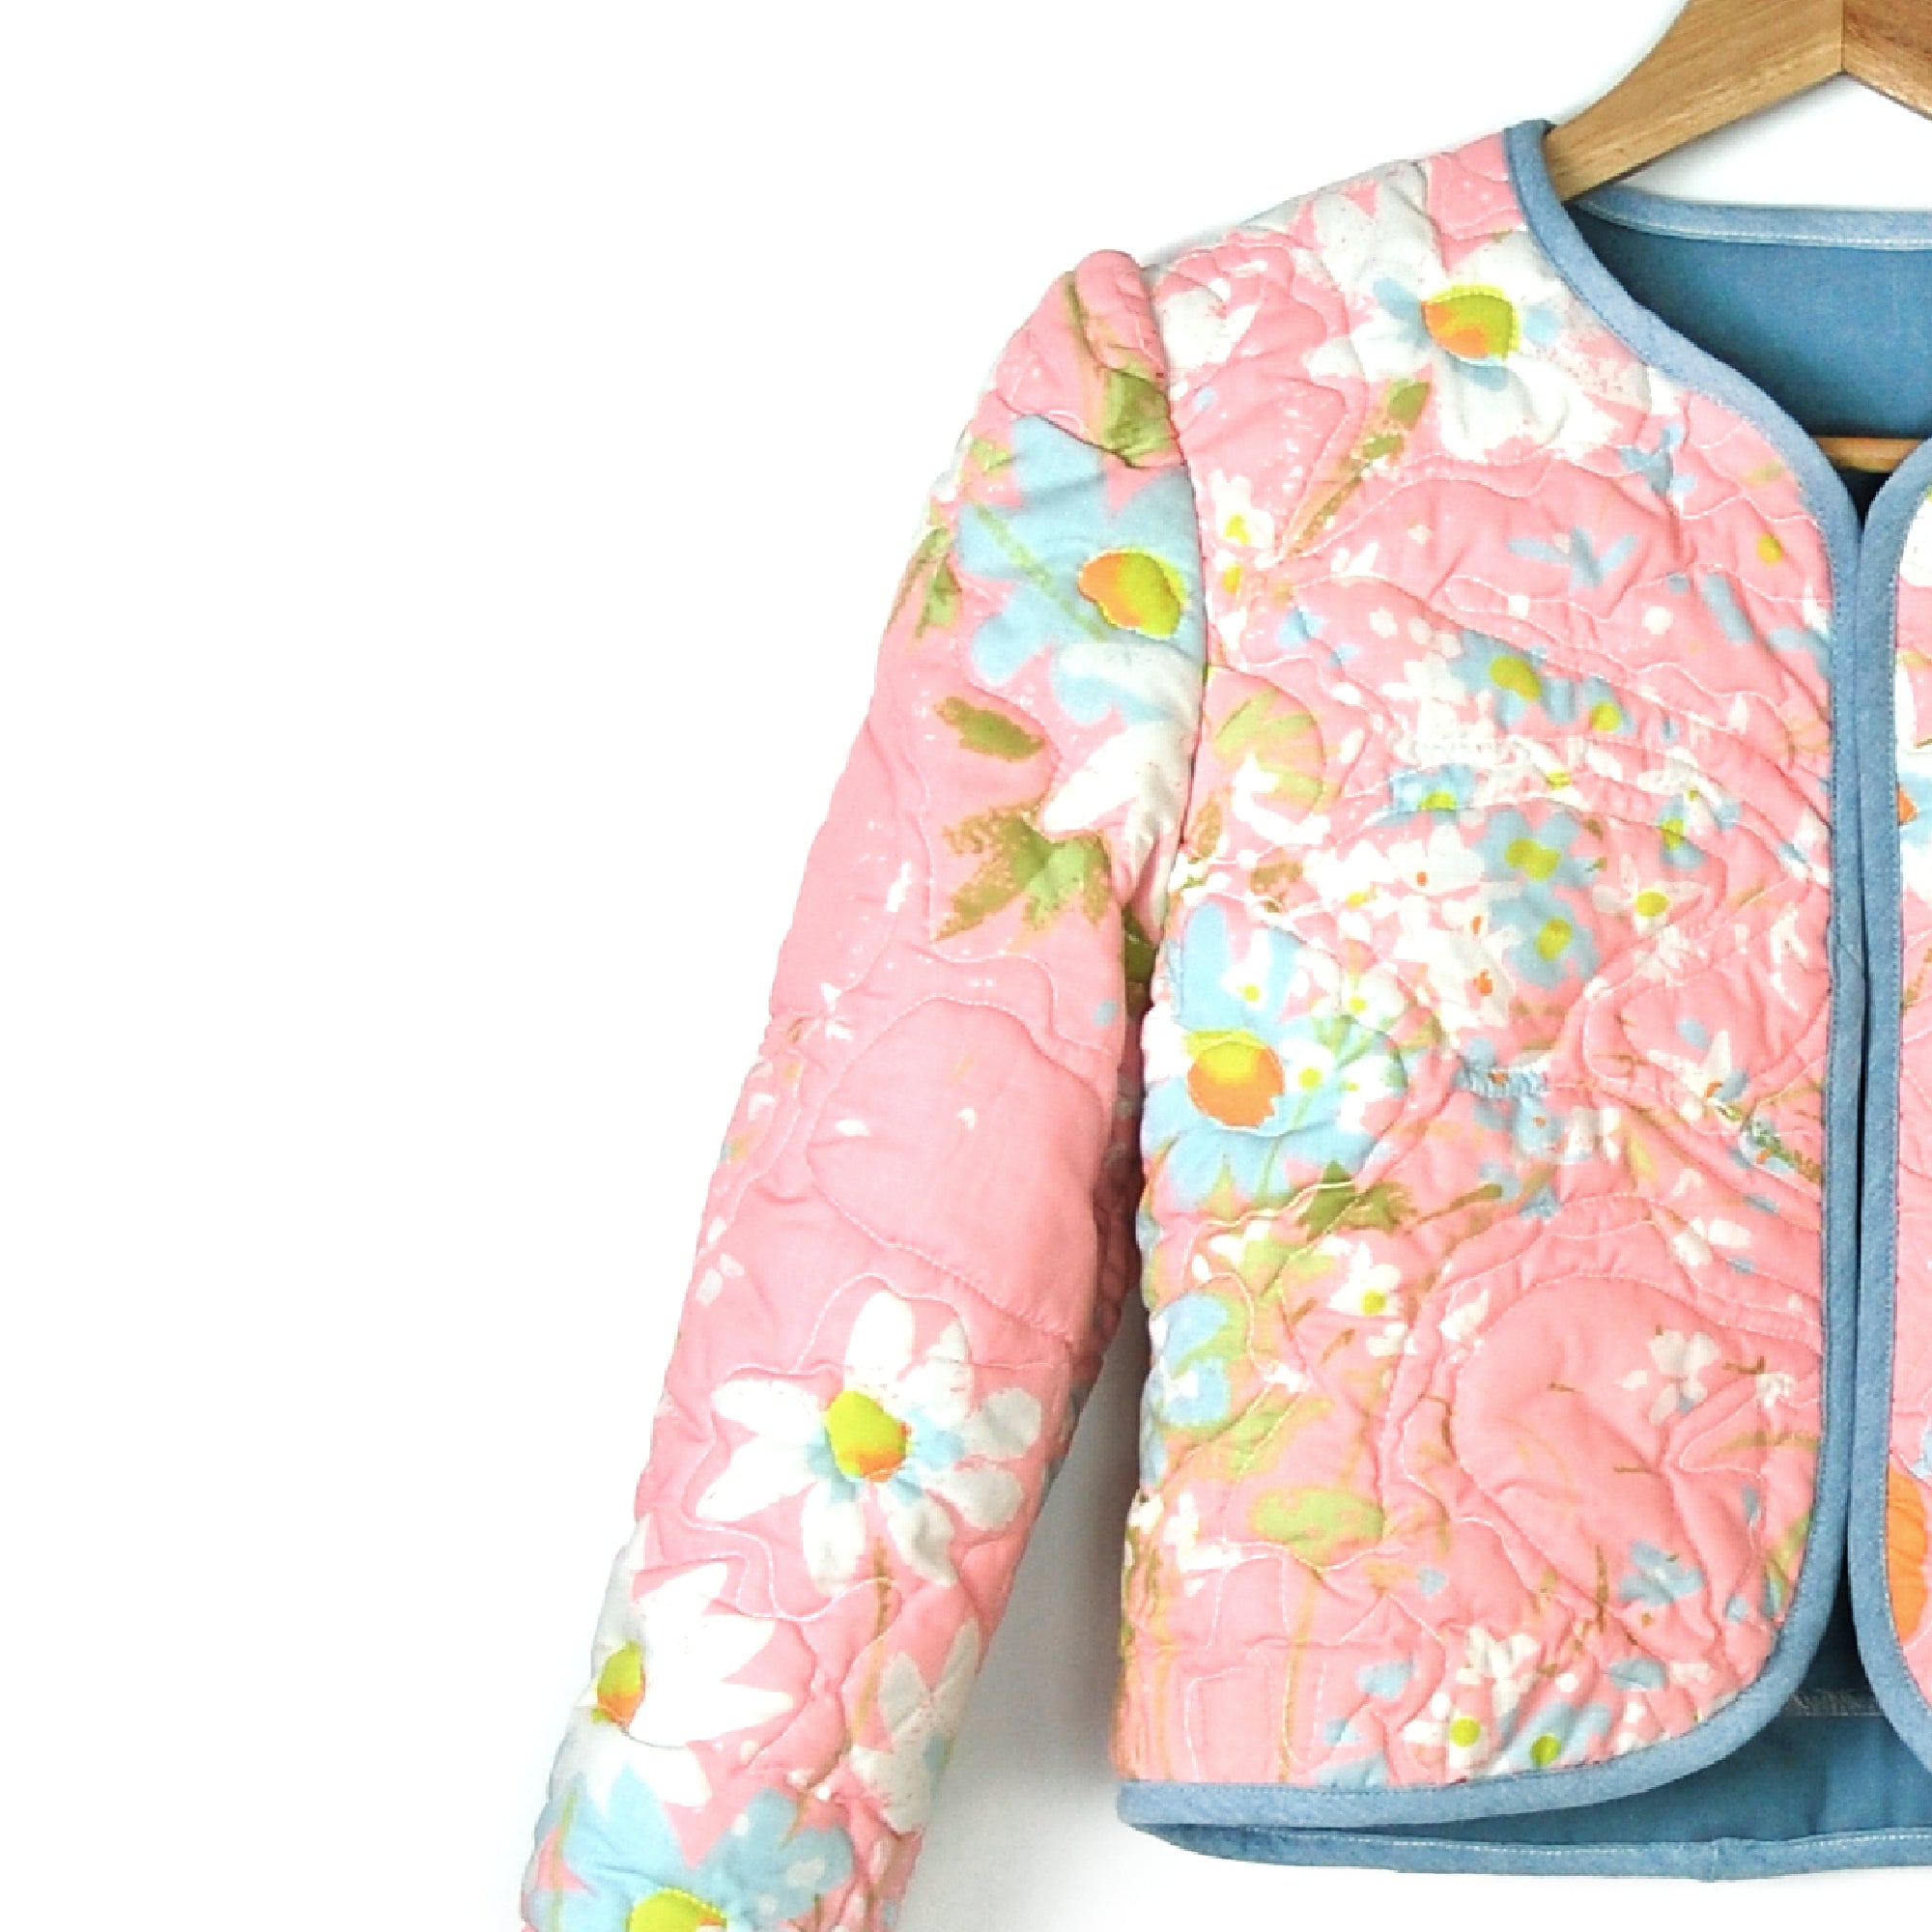 COTTON CANDY GARDEN 2 QUILTED JACKET - Late to the Party